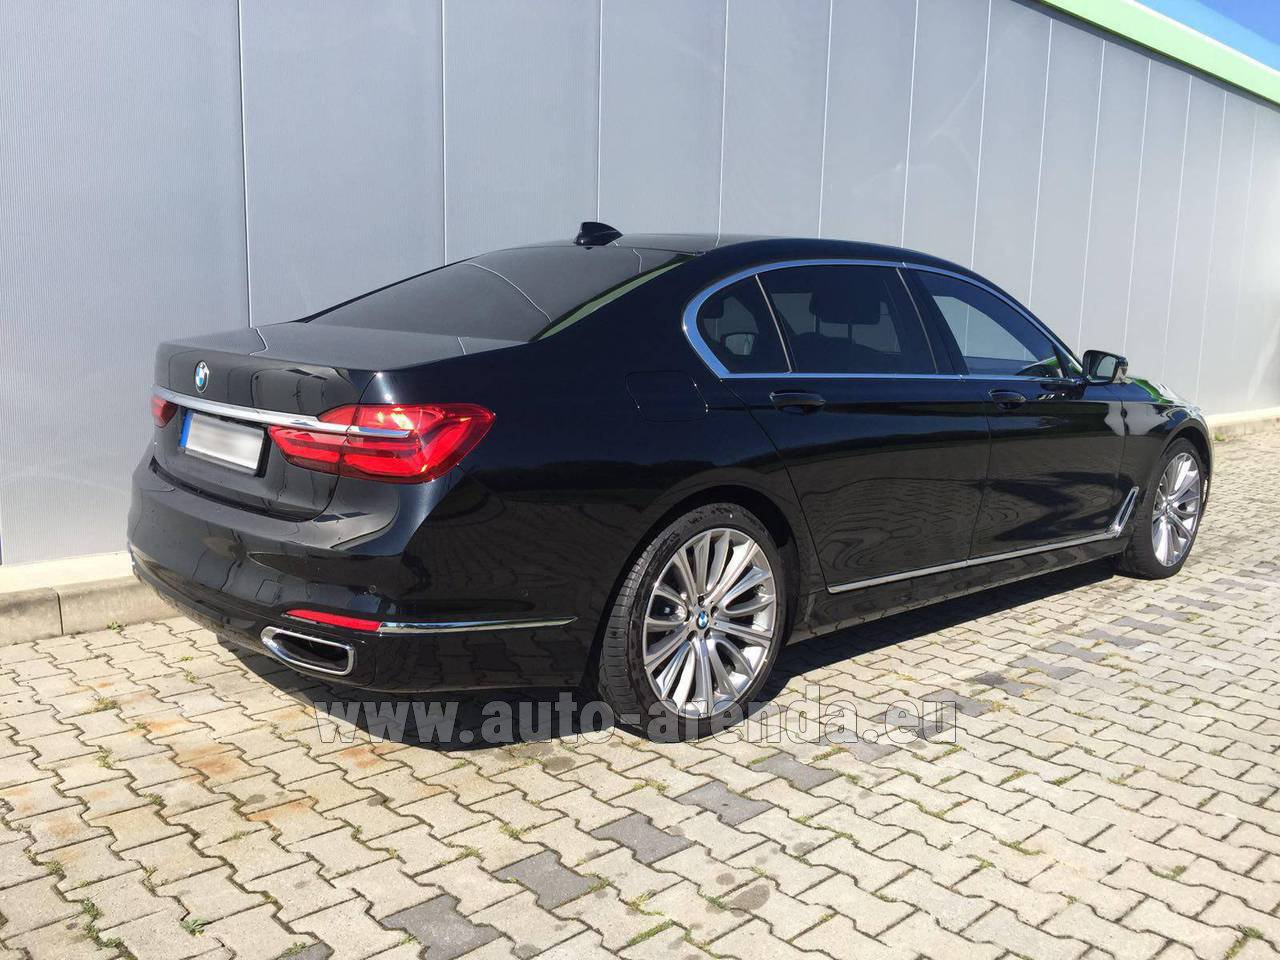 Rent the BMW 740 Lang xDrive M Sportpaket Executive Lounge car in 